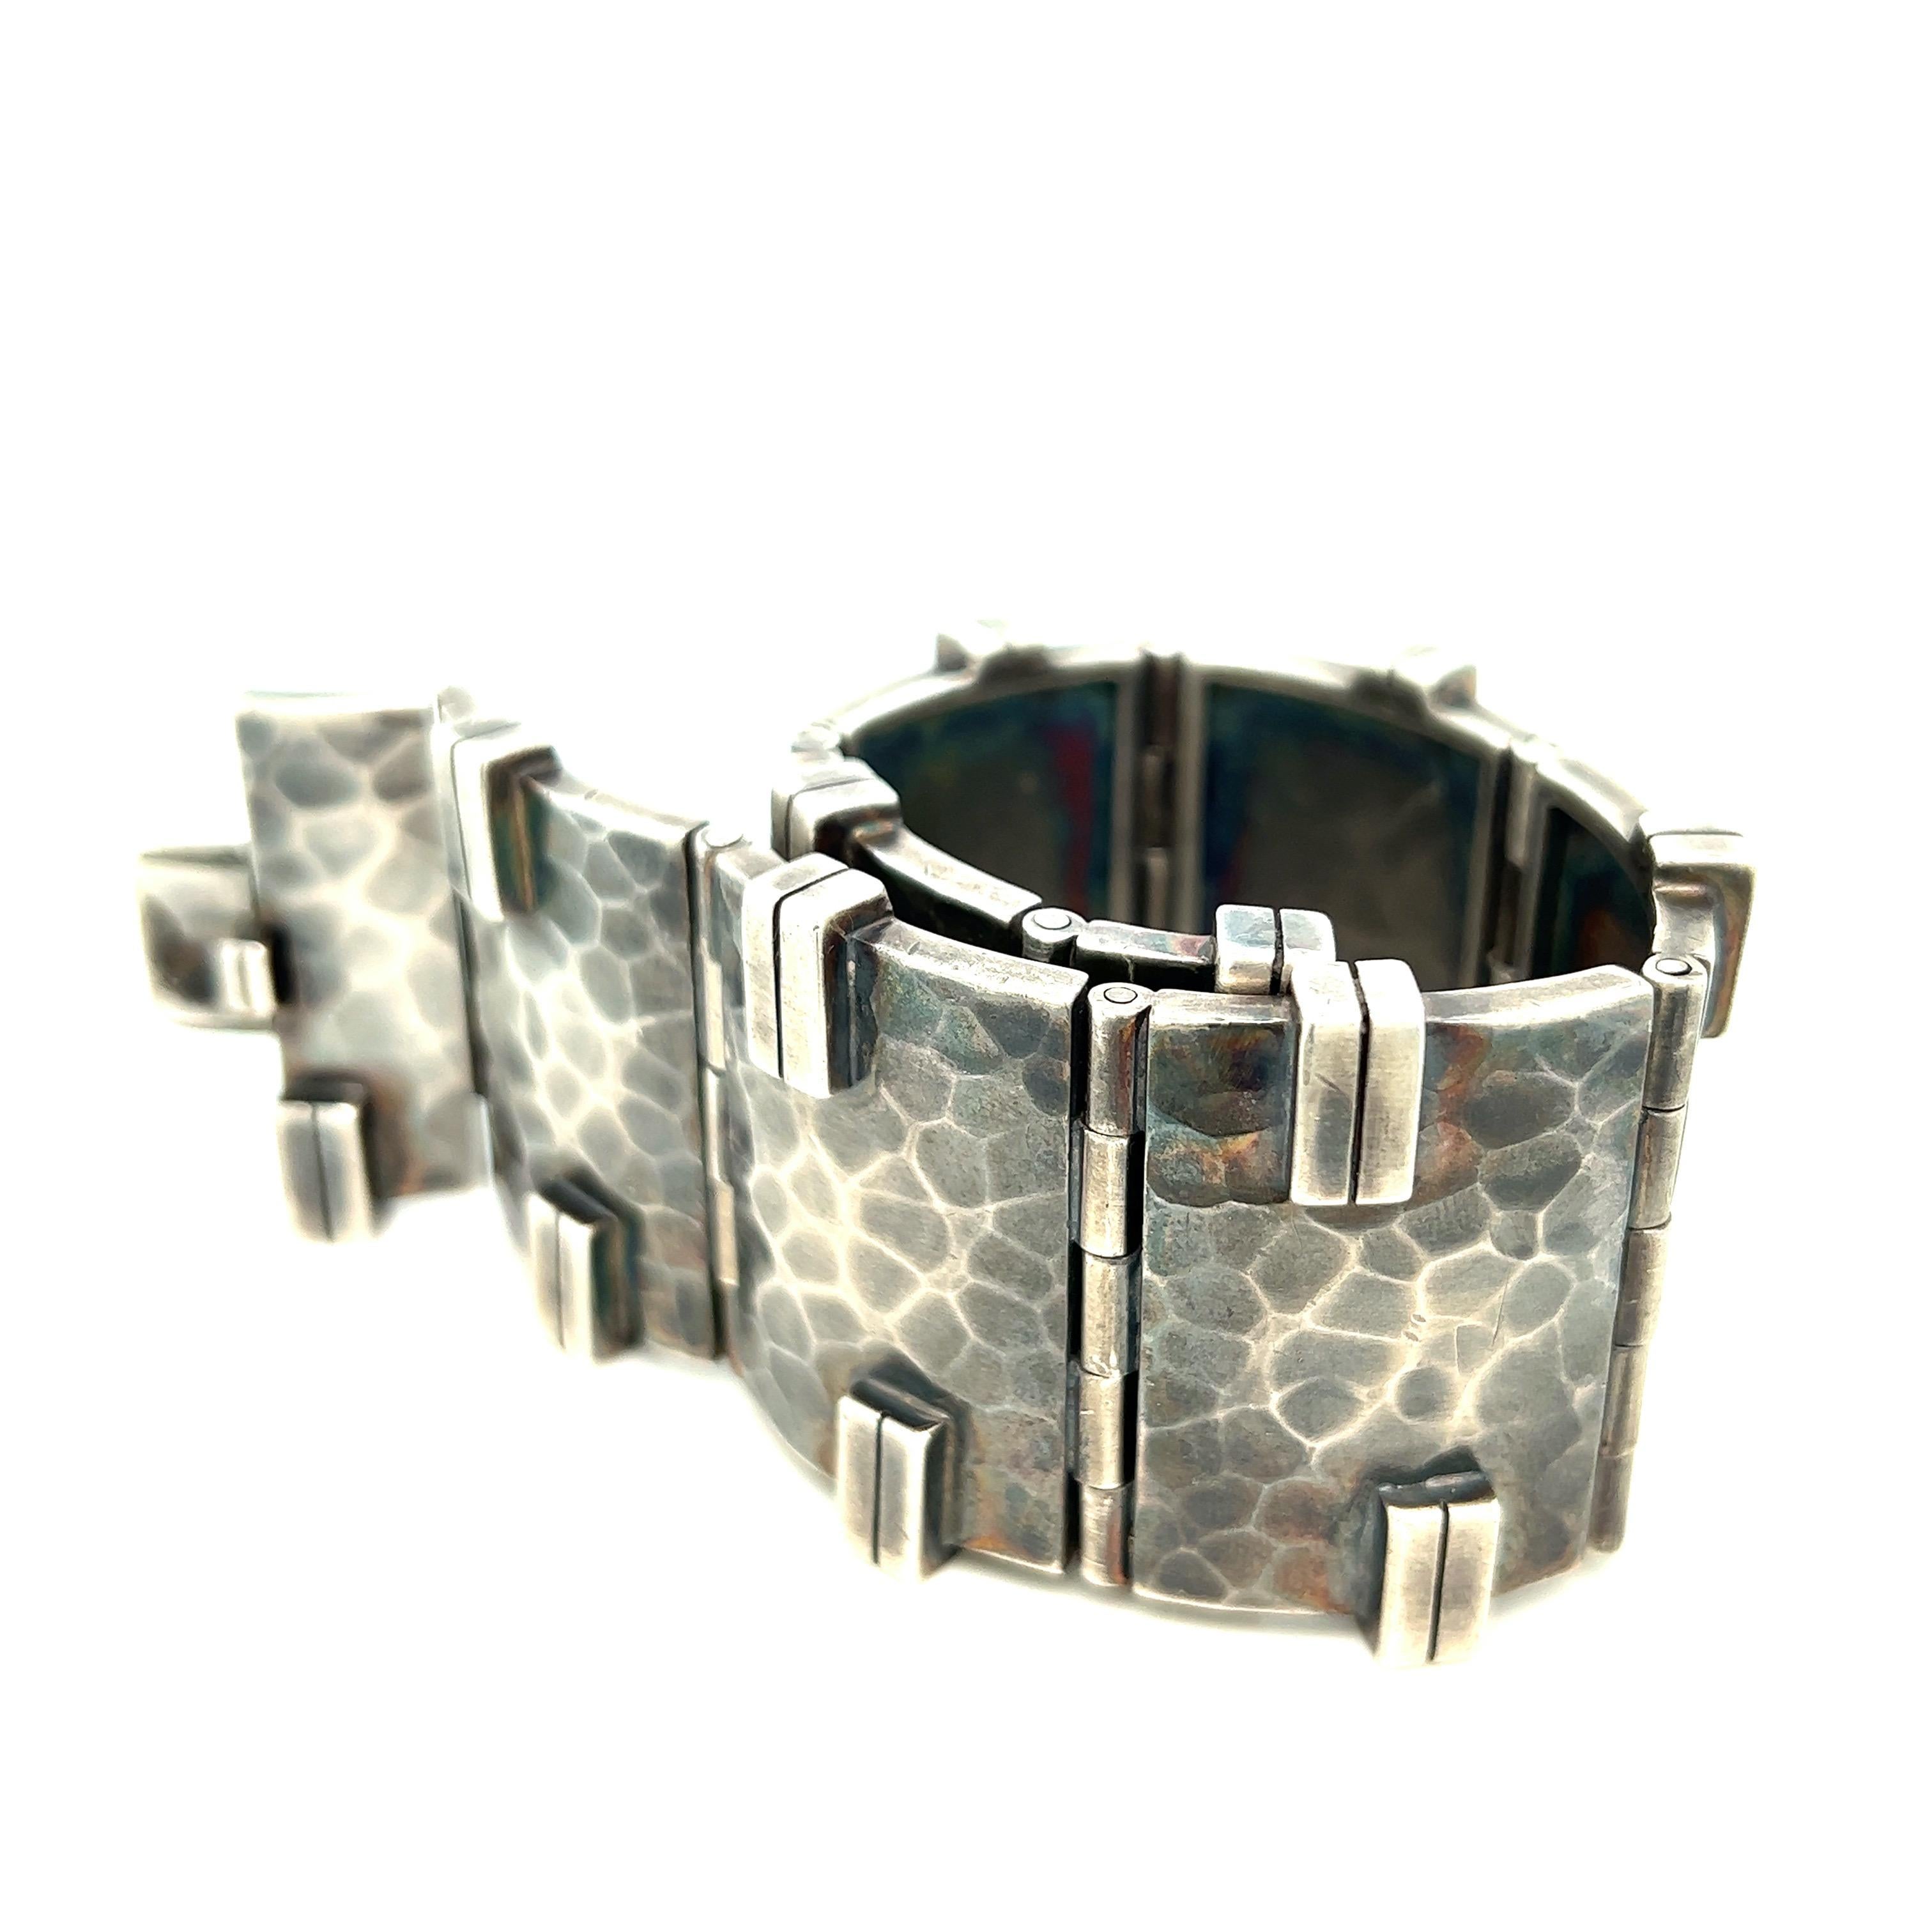 Jean Després Hammered Silver Bracelet In Excellent Condition For Sale In New York, NY